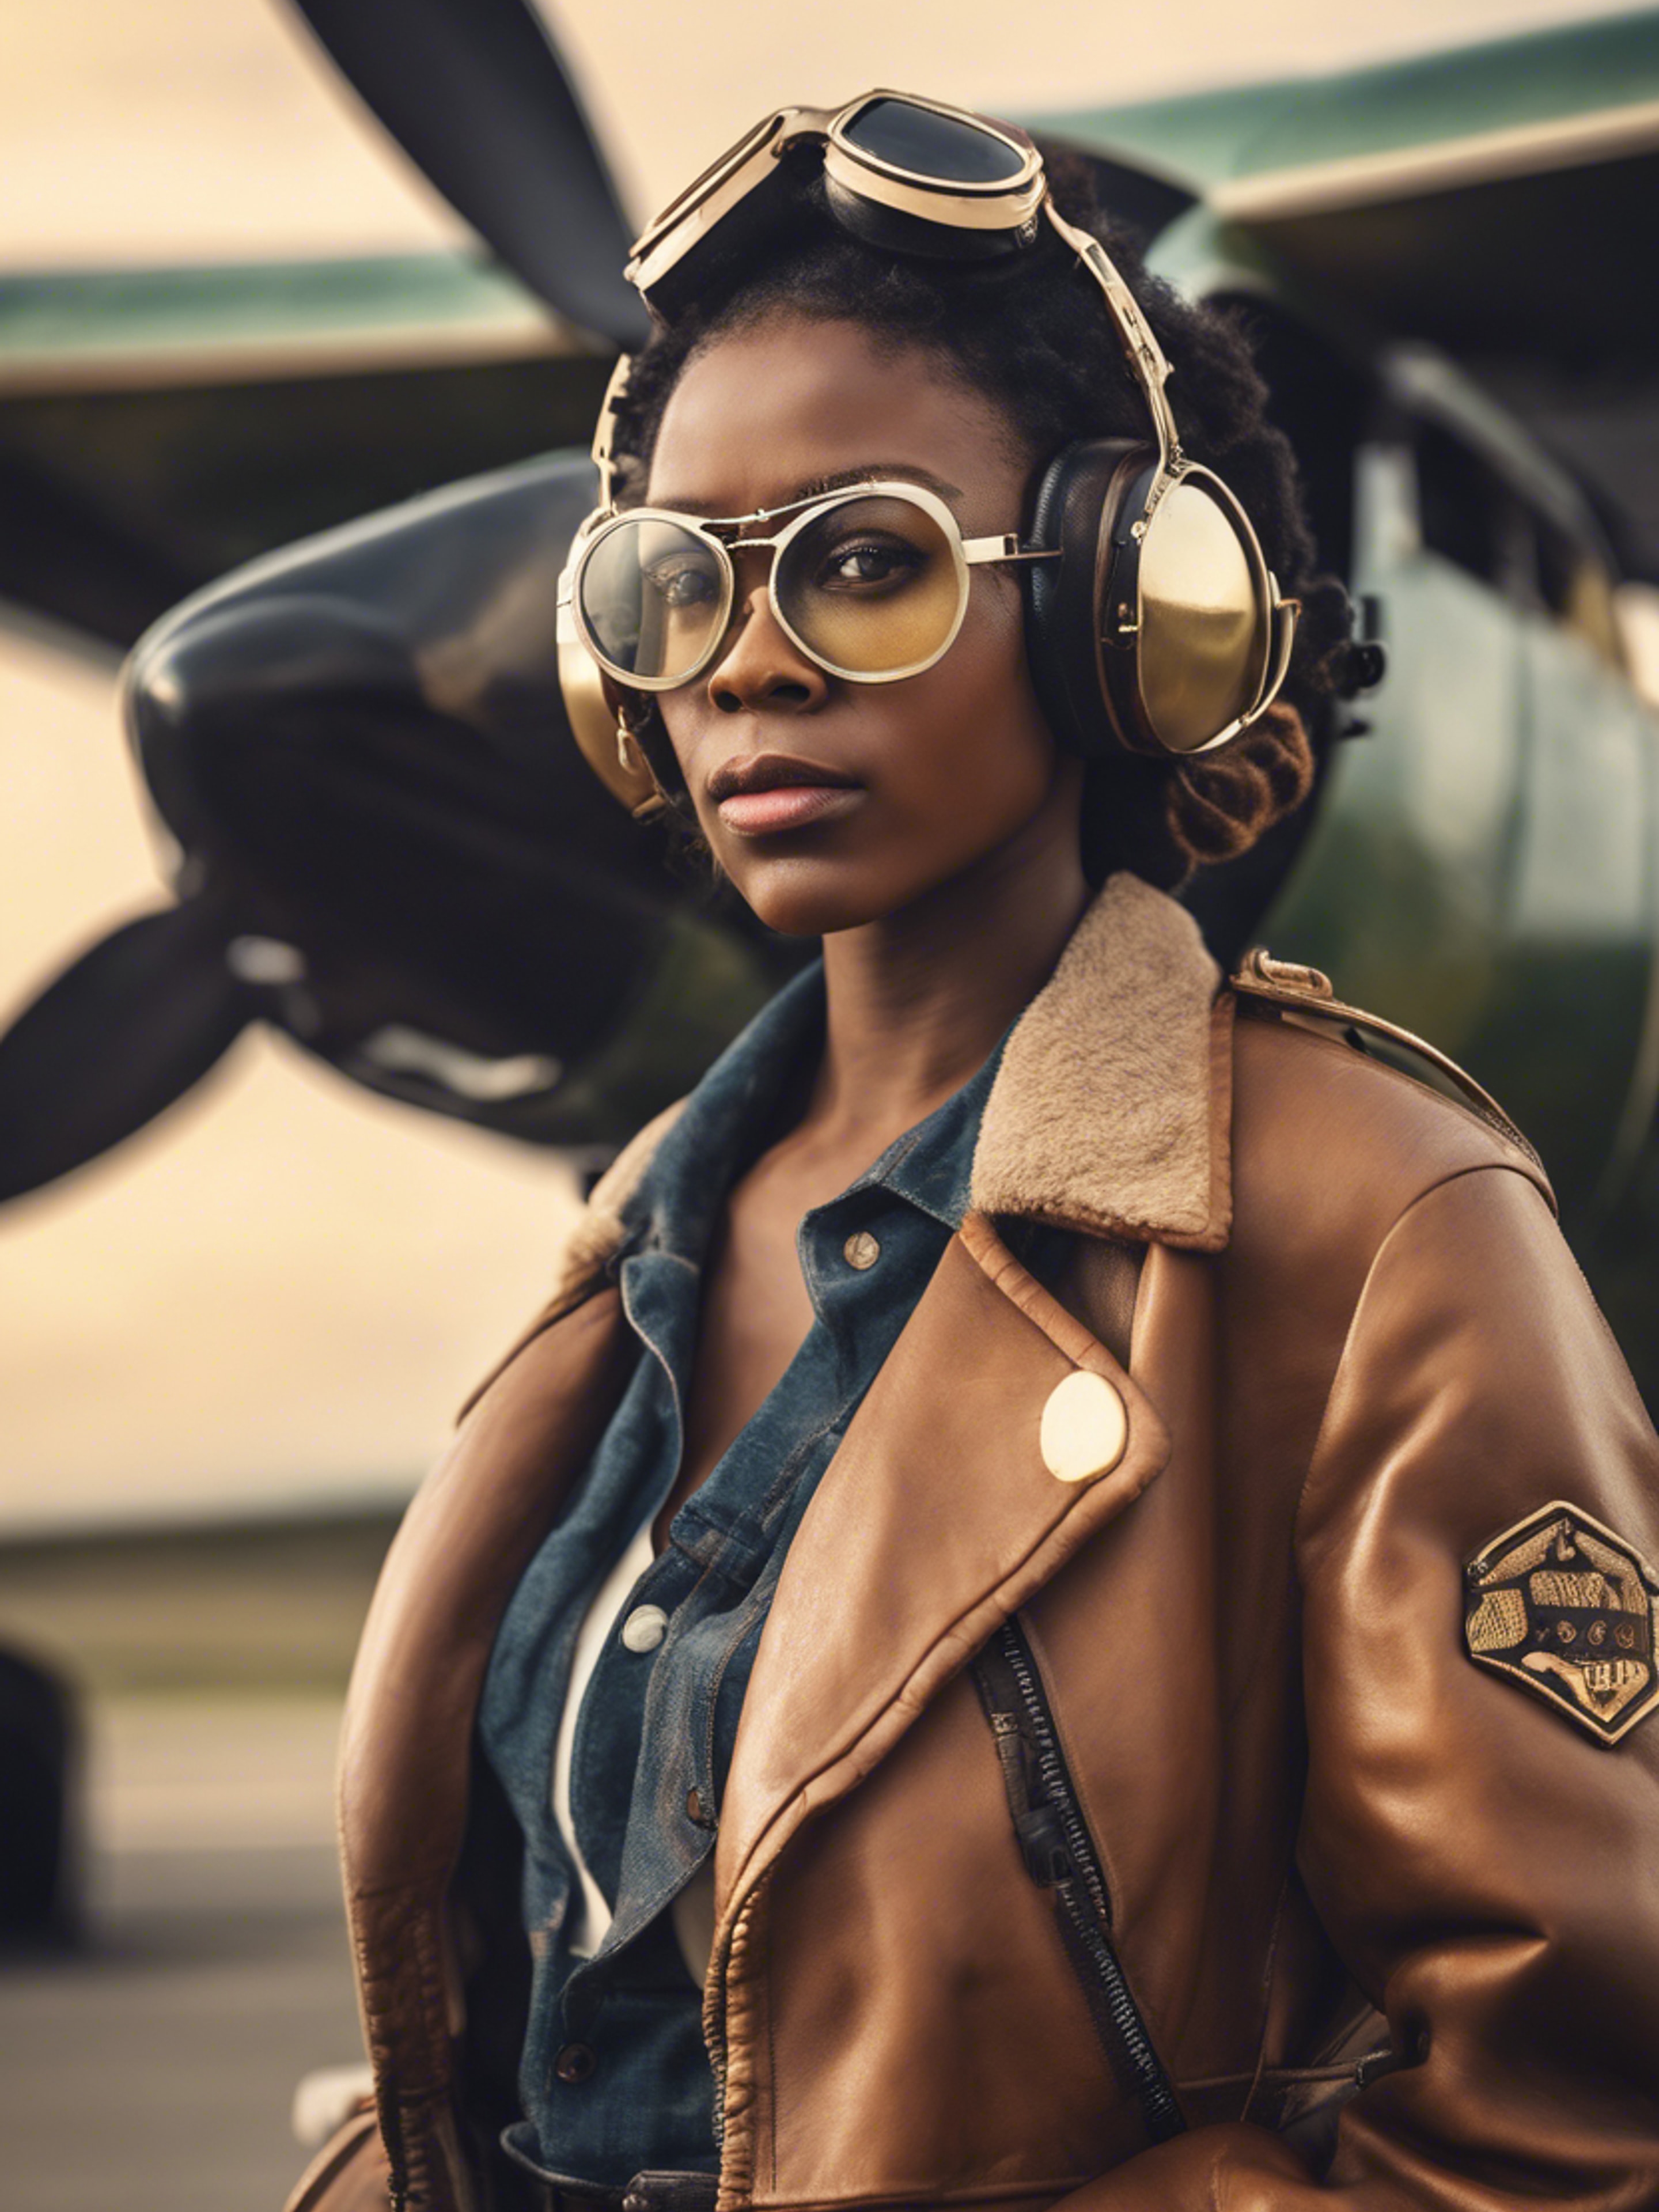 A black girl in an aviator jacket and goggles flying a retro propeller plane. Wallpaper[82958076c6f747e0ac9d]